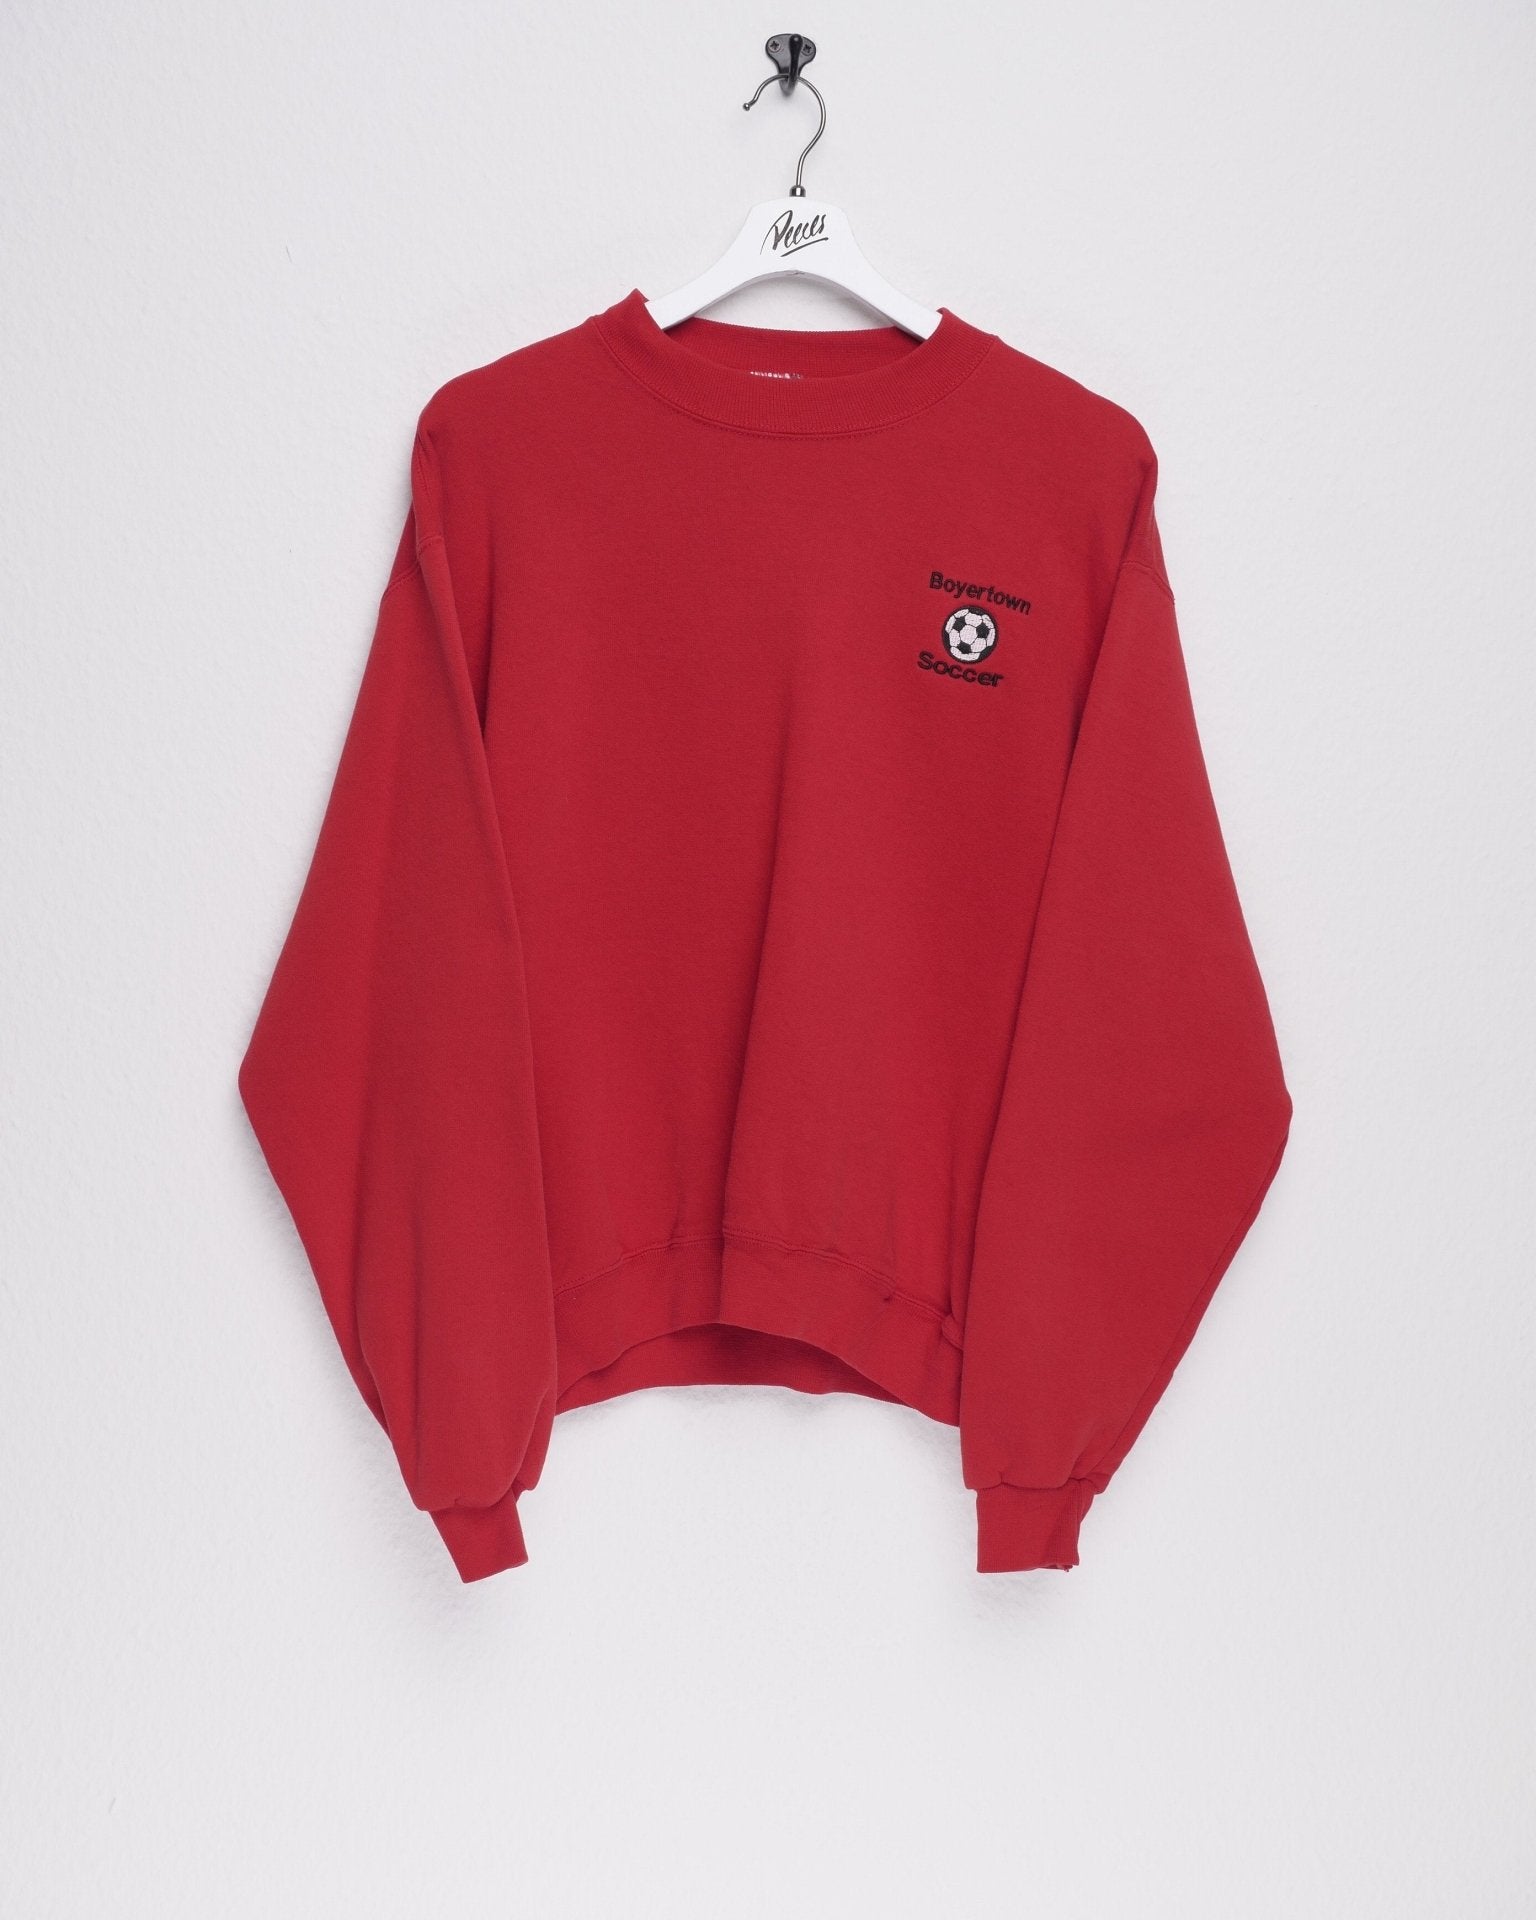 jerzees 'Boyertown Soccer' embroidered Graphic red Sweater - Peeces